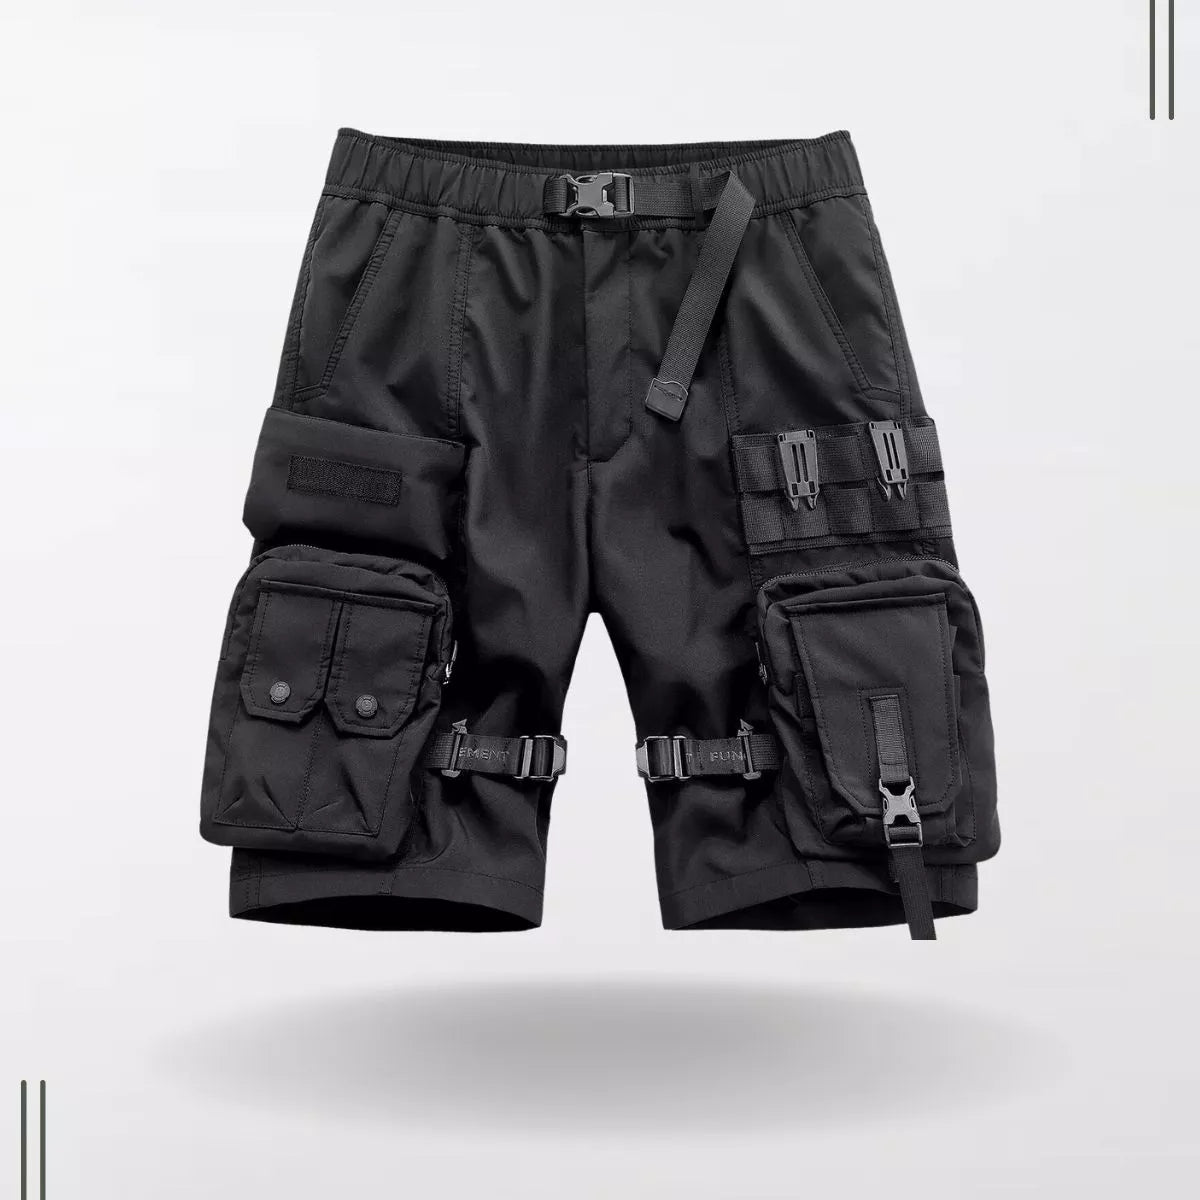 S/23 Functional Multi Pocket Shorts By Clotechnow